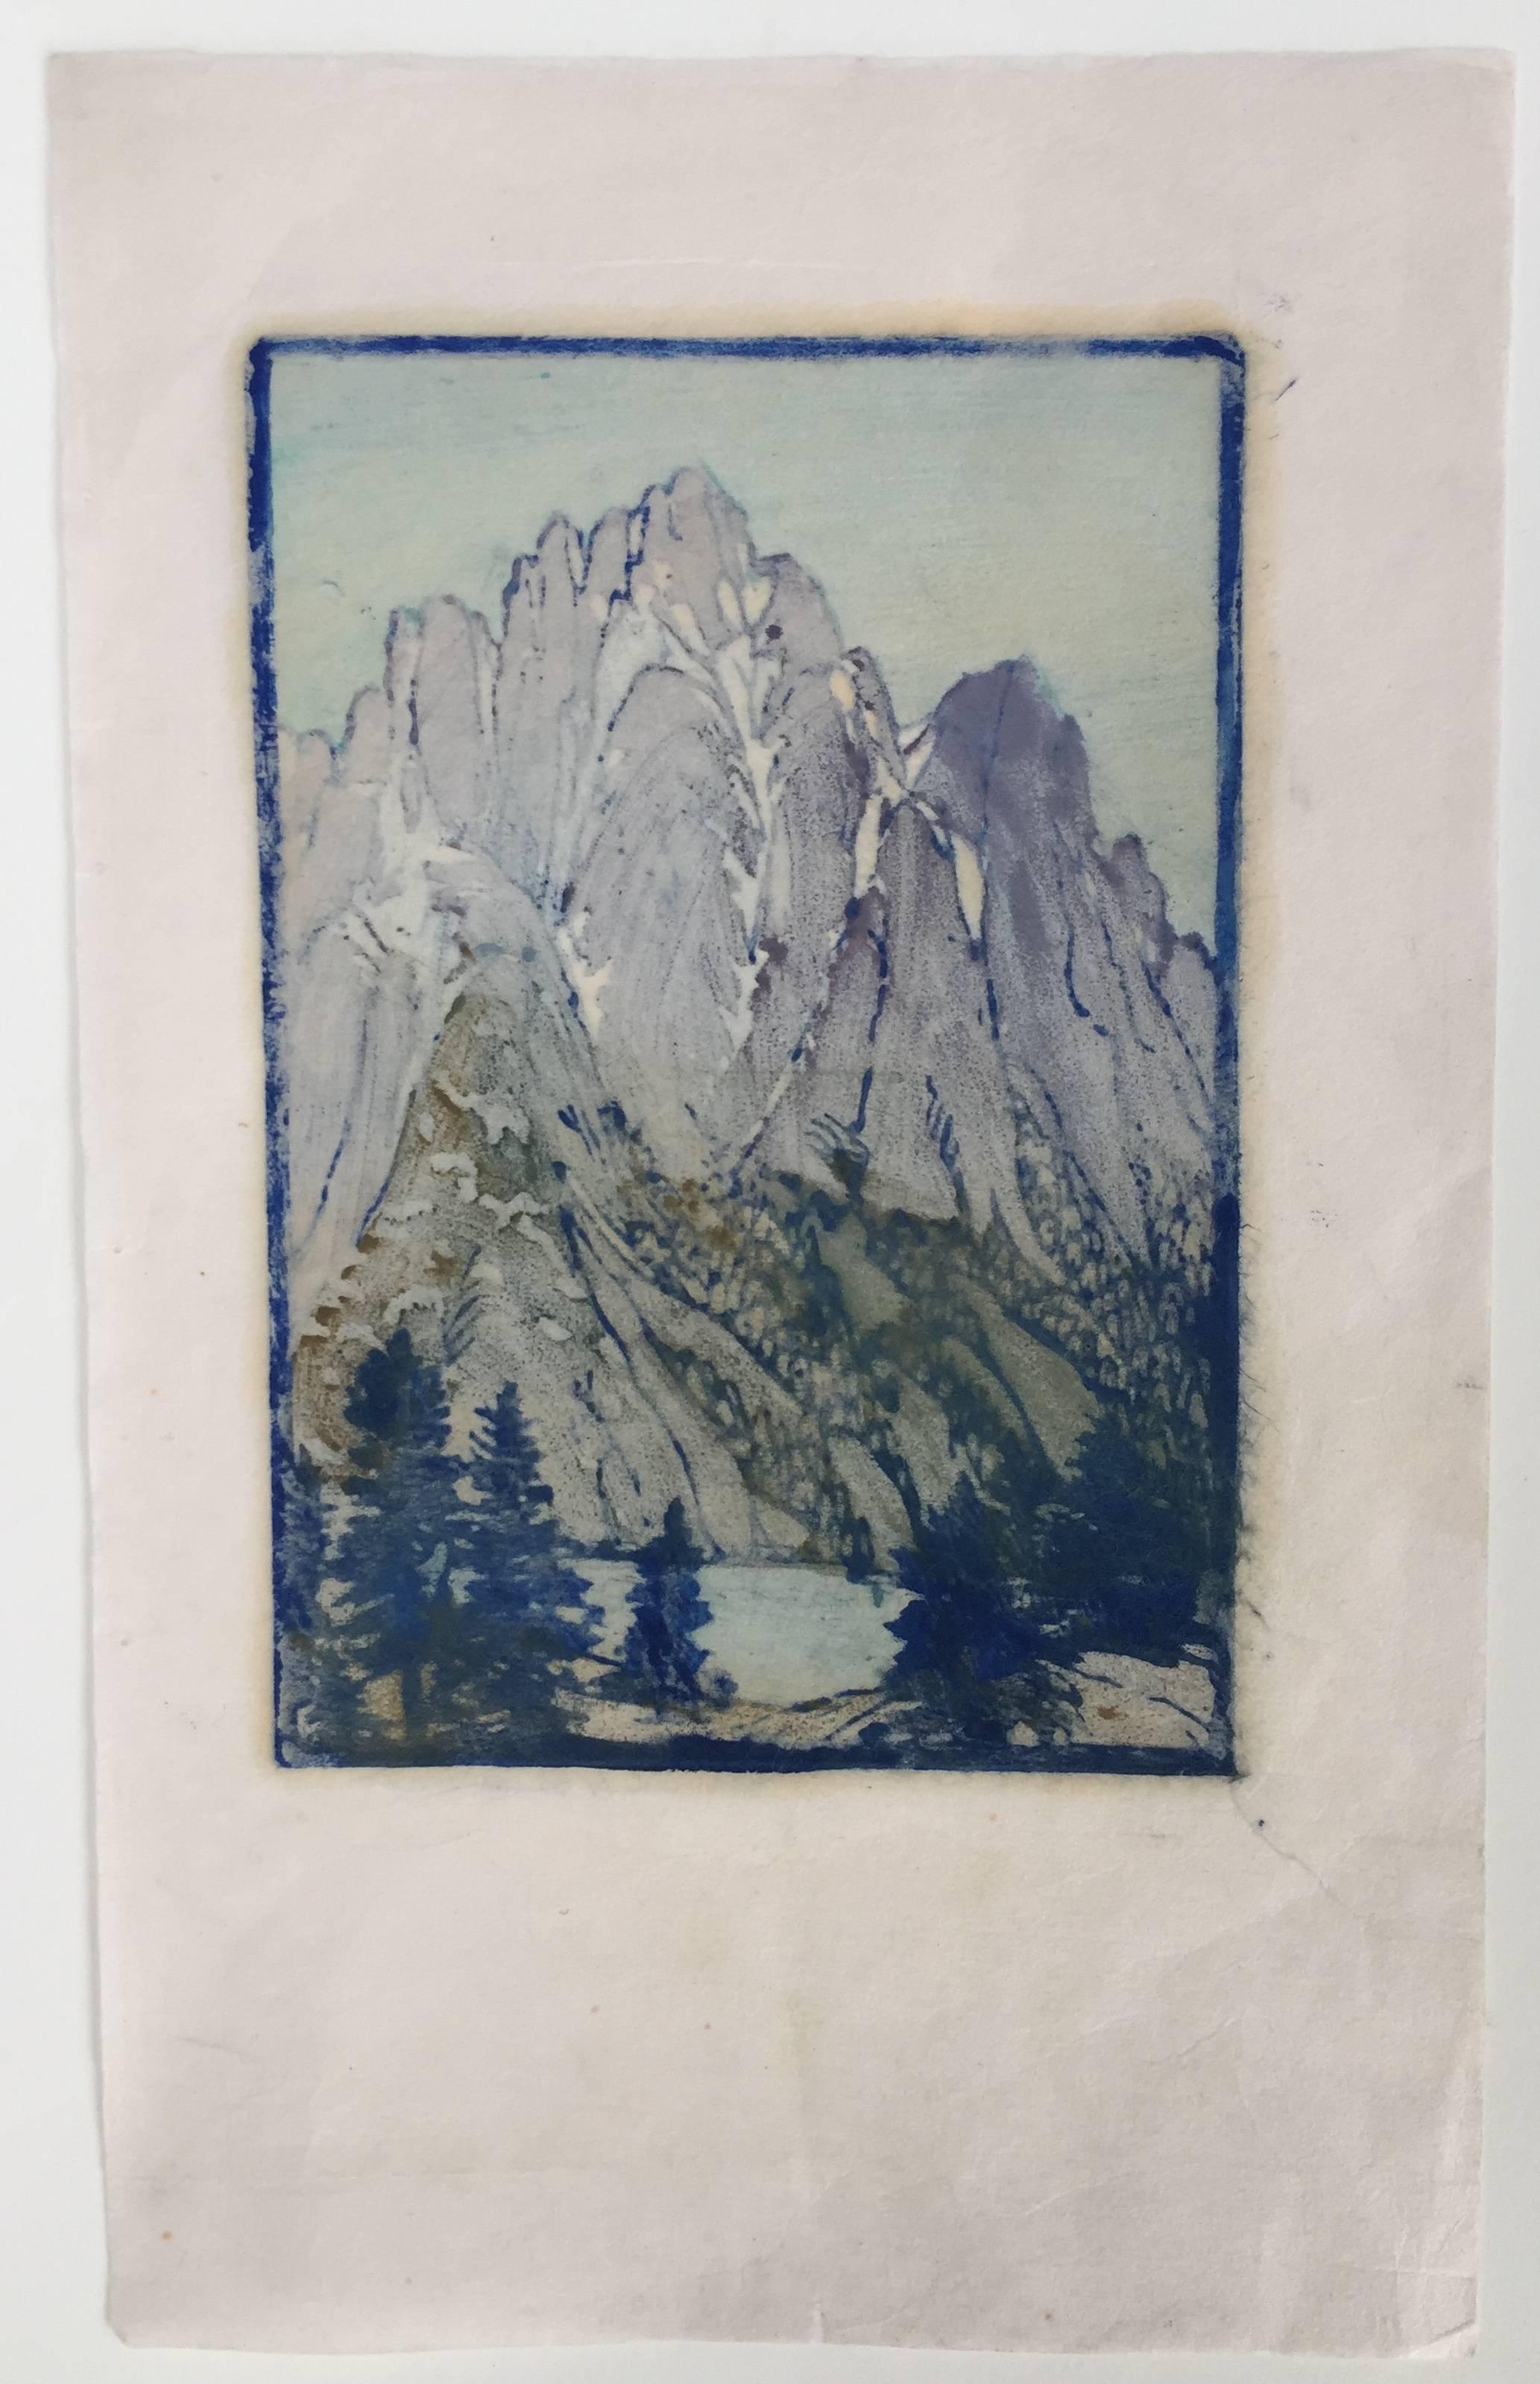 LONELY SIERRA - Gray Landscape Print by Frances H. Gearhart